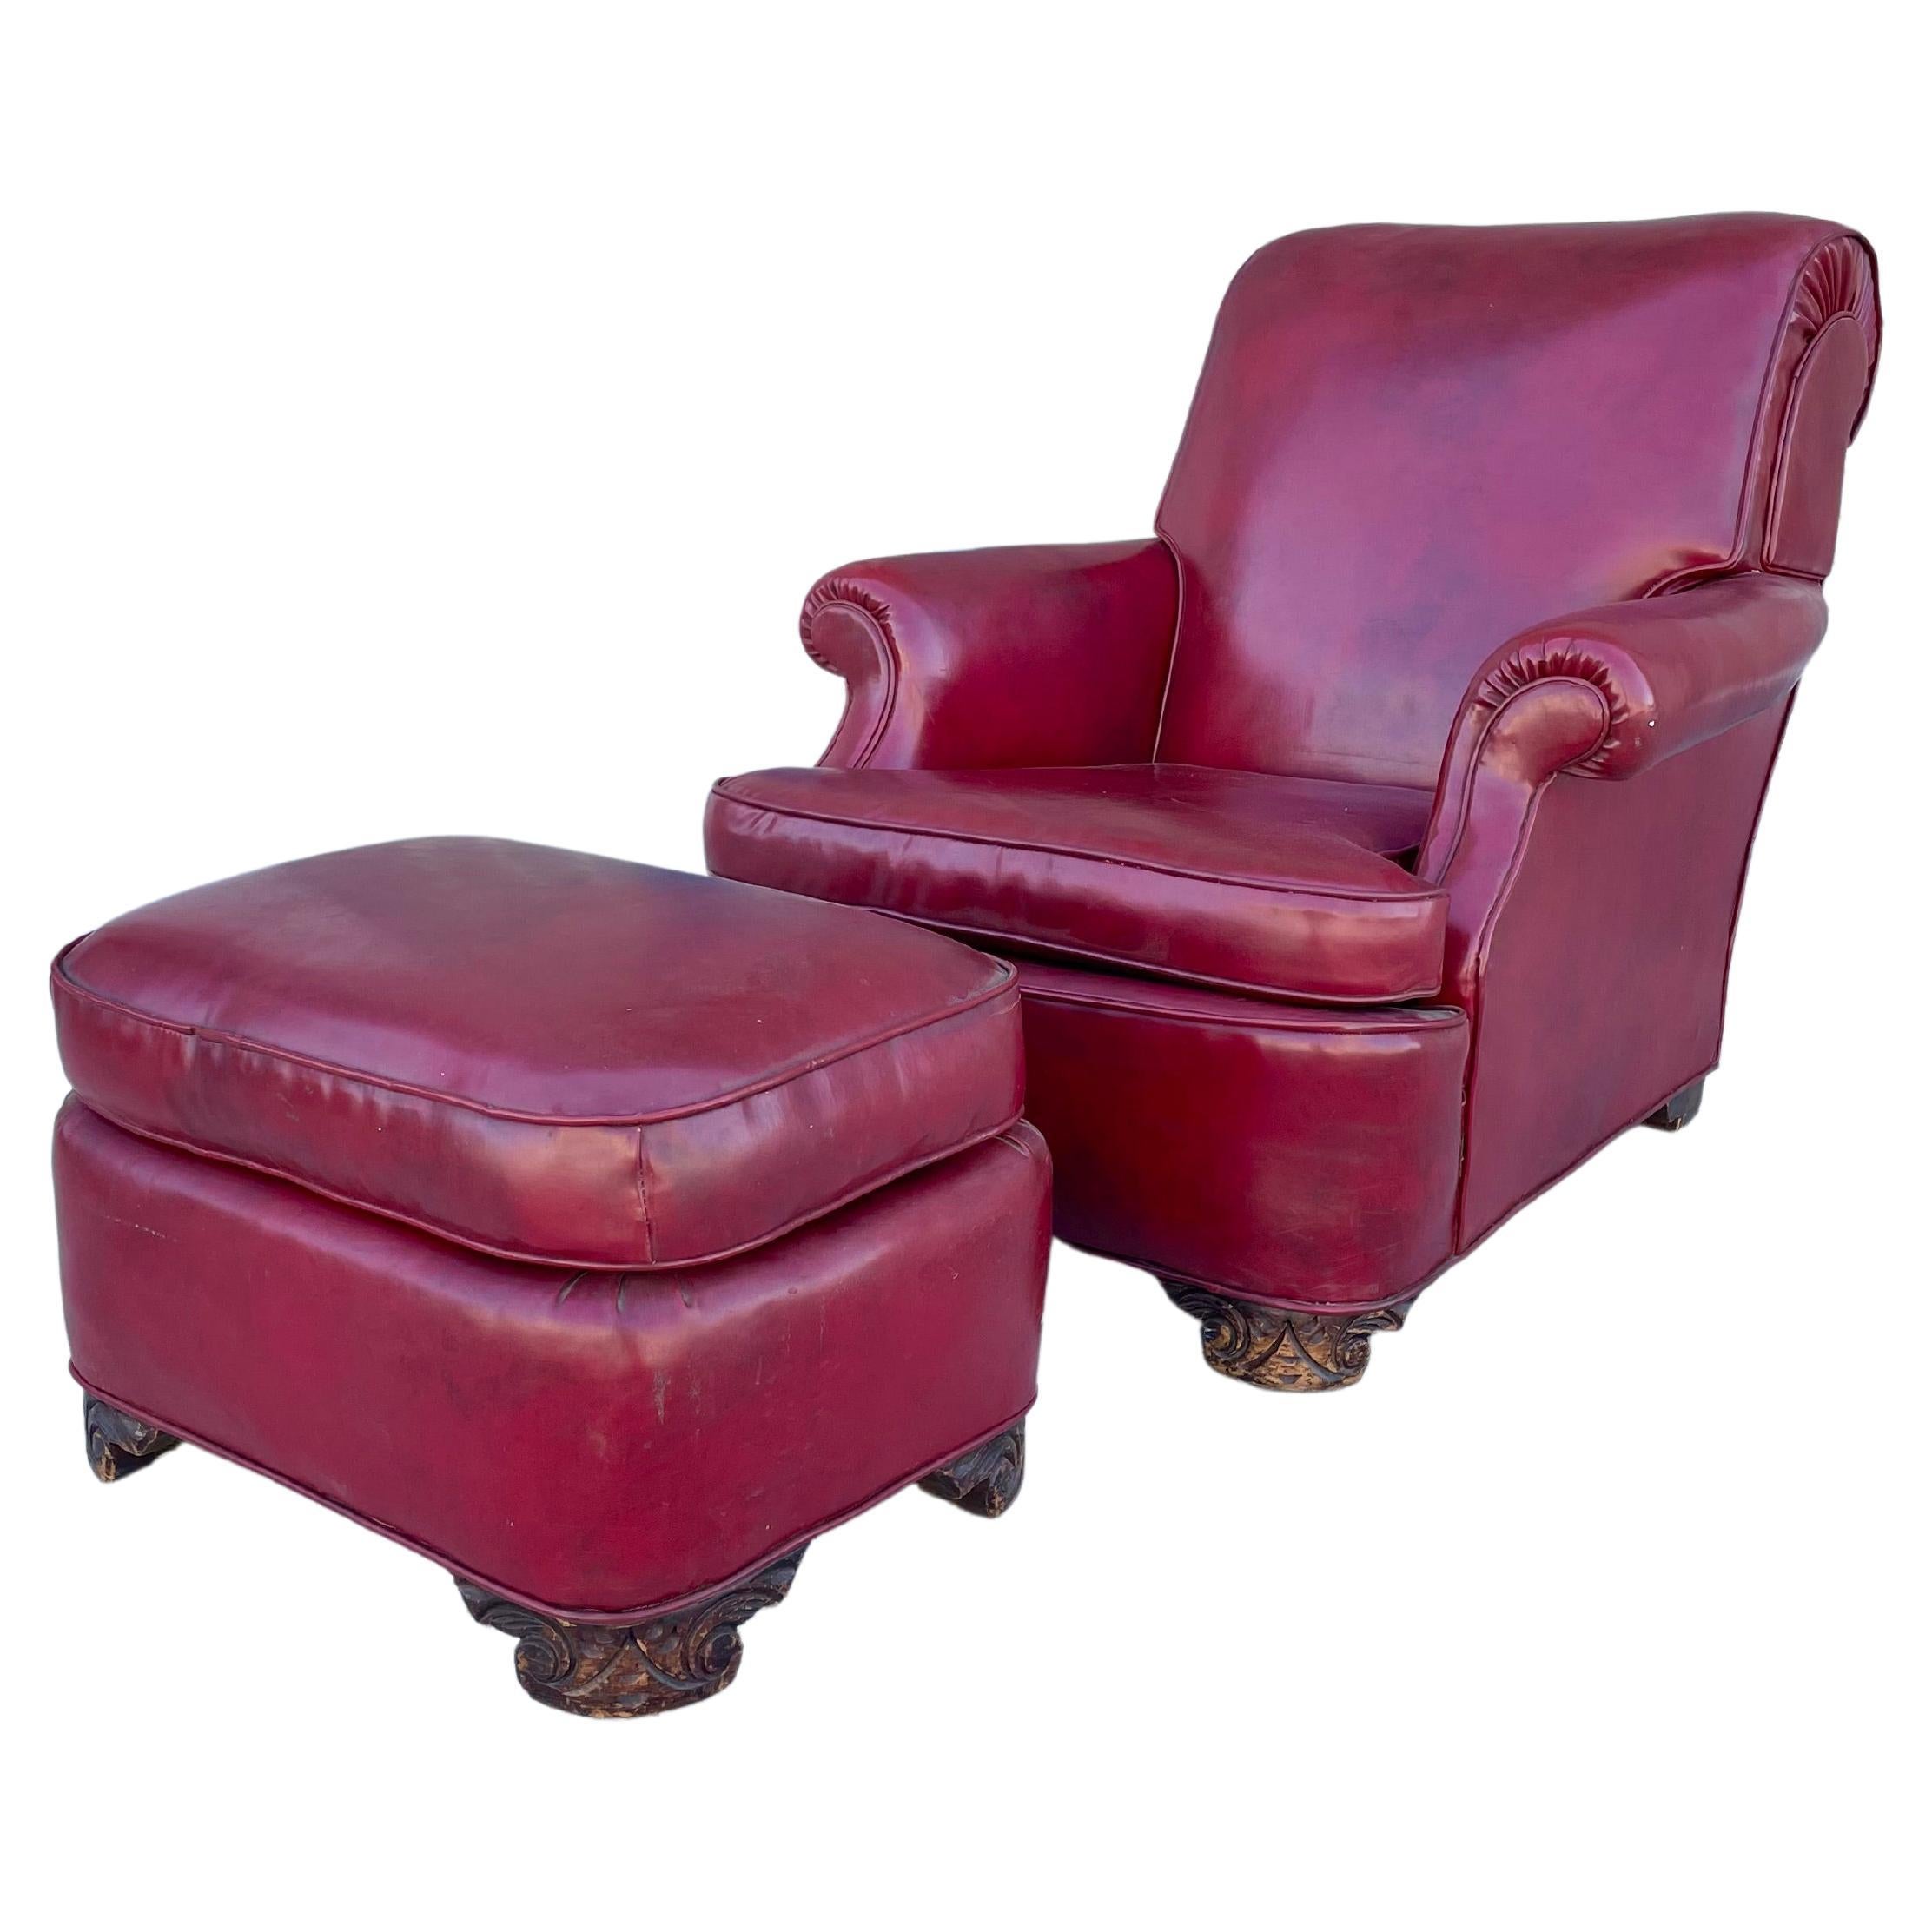 1950s Vintage Leather Chair & Ottoman - Set of 2